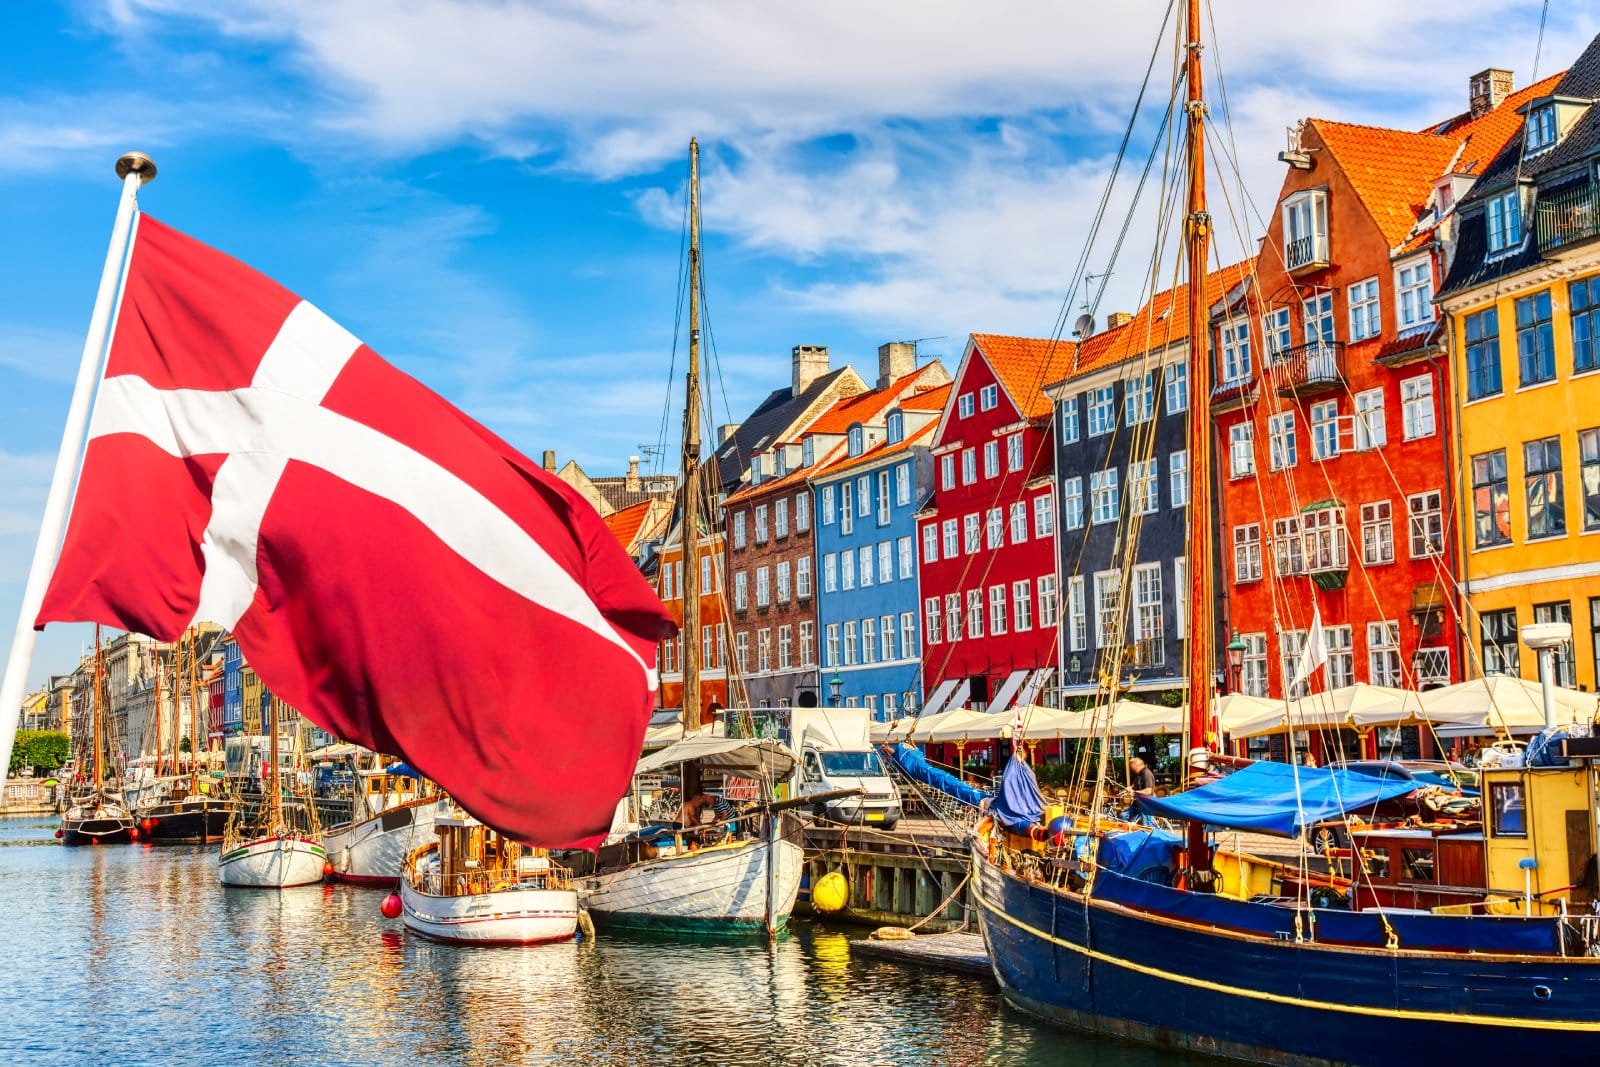 <p class="wp-caption-text">Image Credit: Shutterstock / Nick N A</p>  <p><span>Denmark ranks high in safety and happiness, and Copenhagen’s historic harbor, Nyhavn, is a testament to the city’s charm with its colorful townhouses and wooden ships.</span></p>